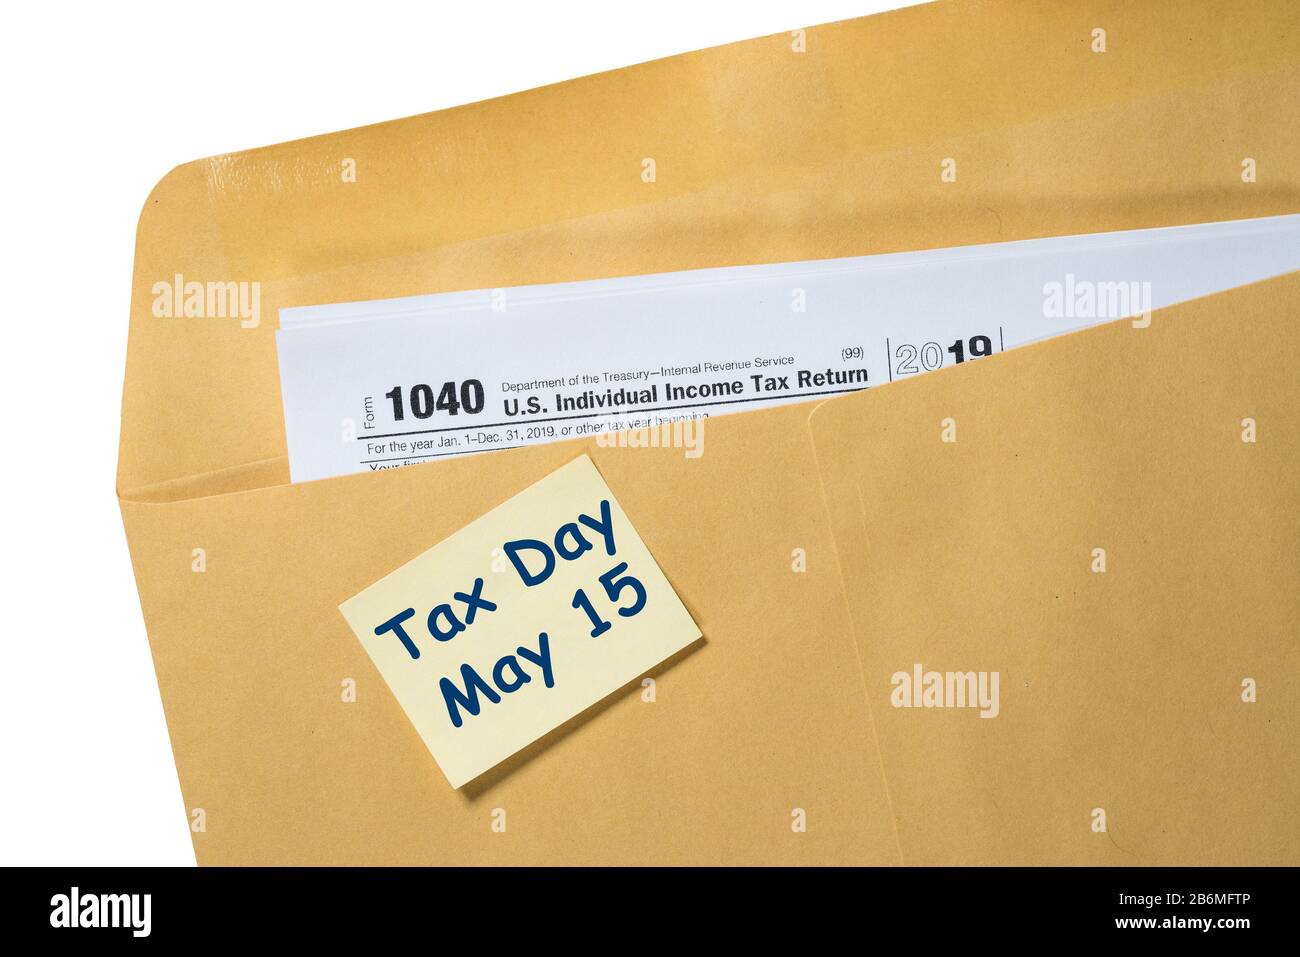 Printed Form 1040 for income tax return in brown envelope with reminder for May 15 tax day due to Covid-19 virus delay Stock Photo